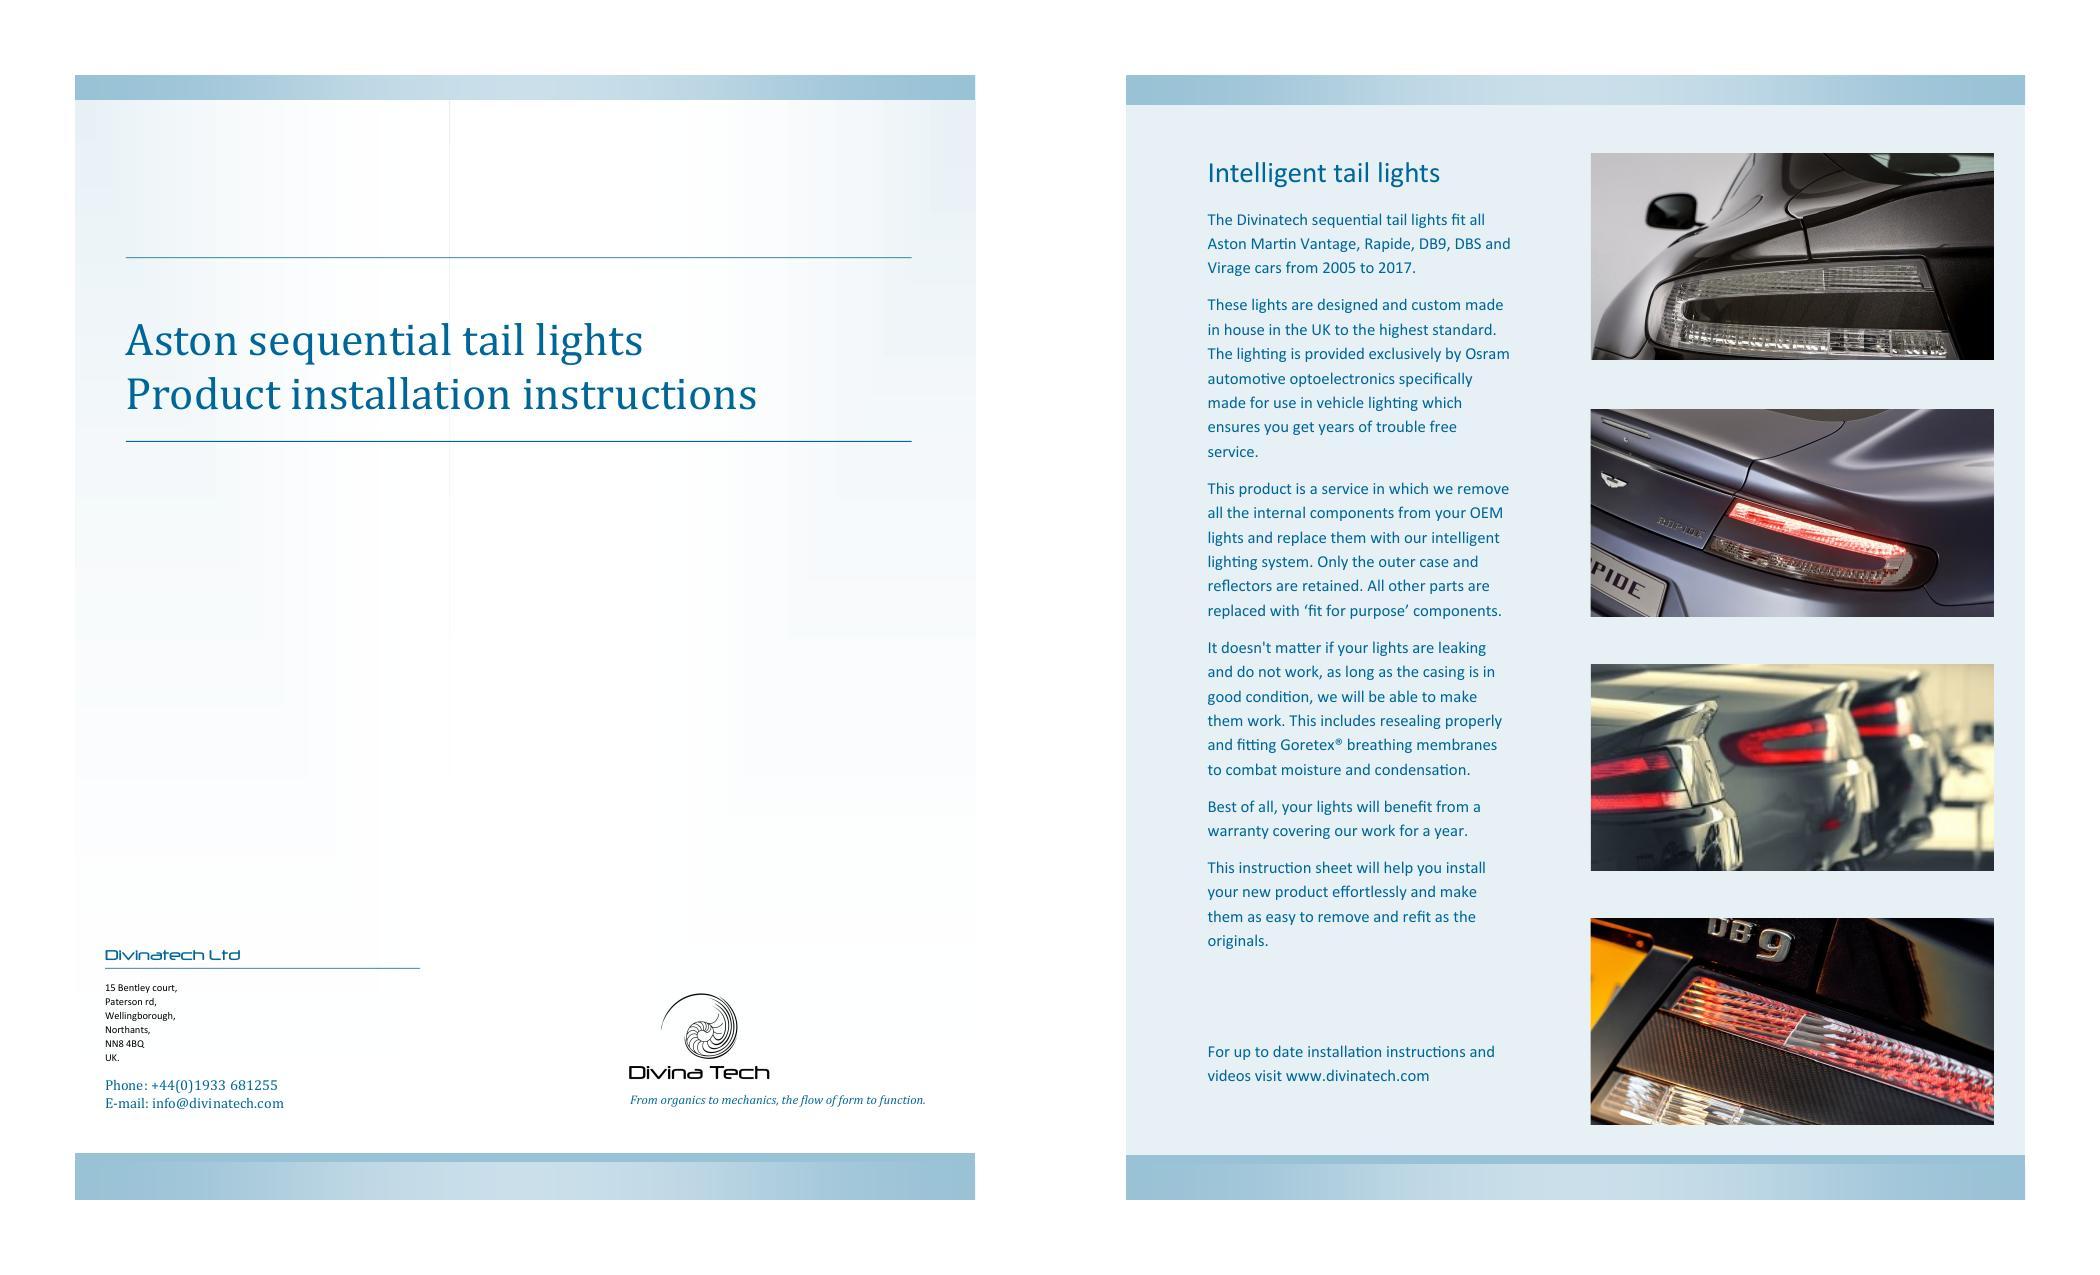 aston-martin-vantage-rapide-db9-dbs-and-virage-sequential-tail-lights-installation-instructions.pdf